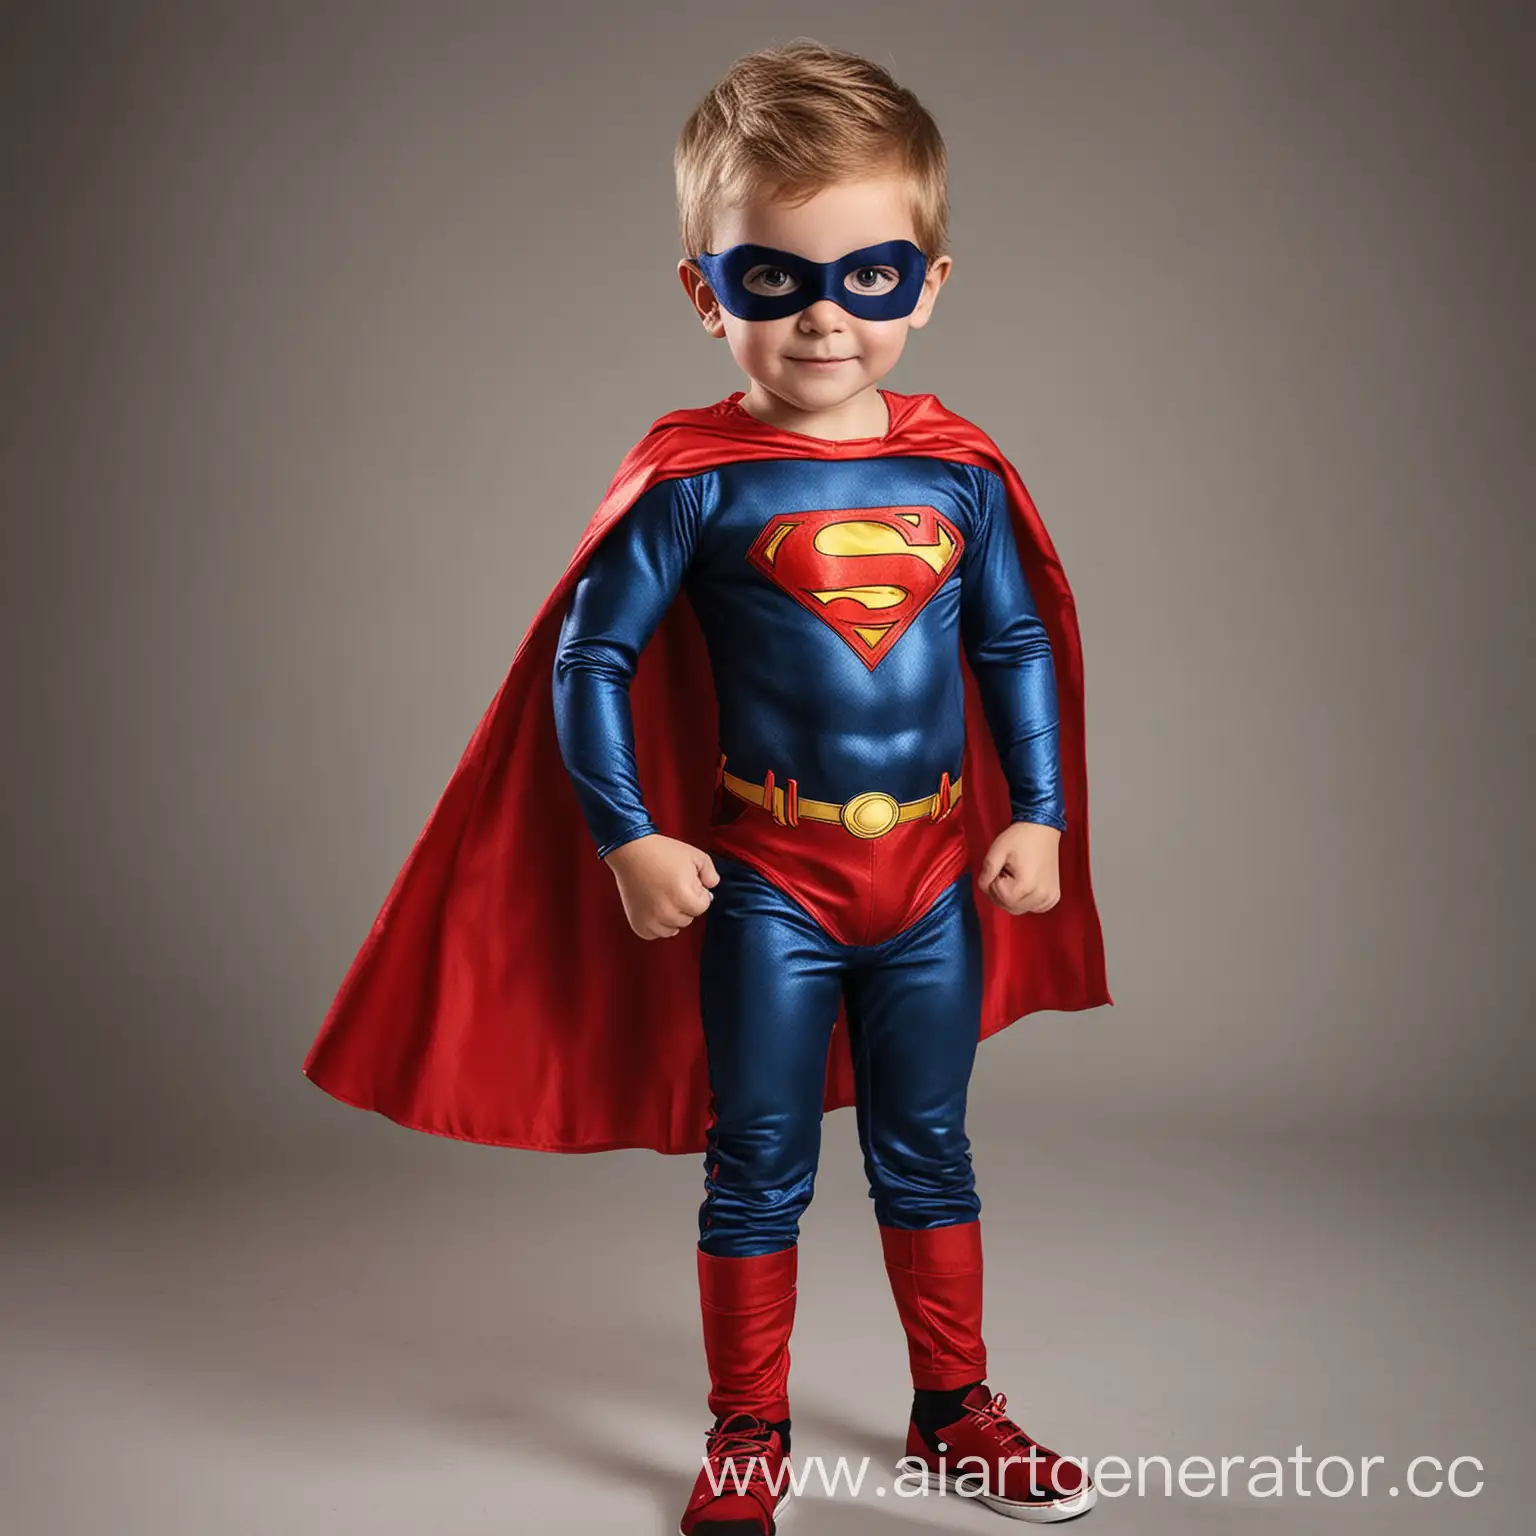 Superhero-Boy-Child-with-Mask-and-Cape-in-Action